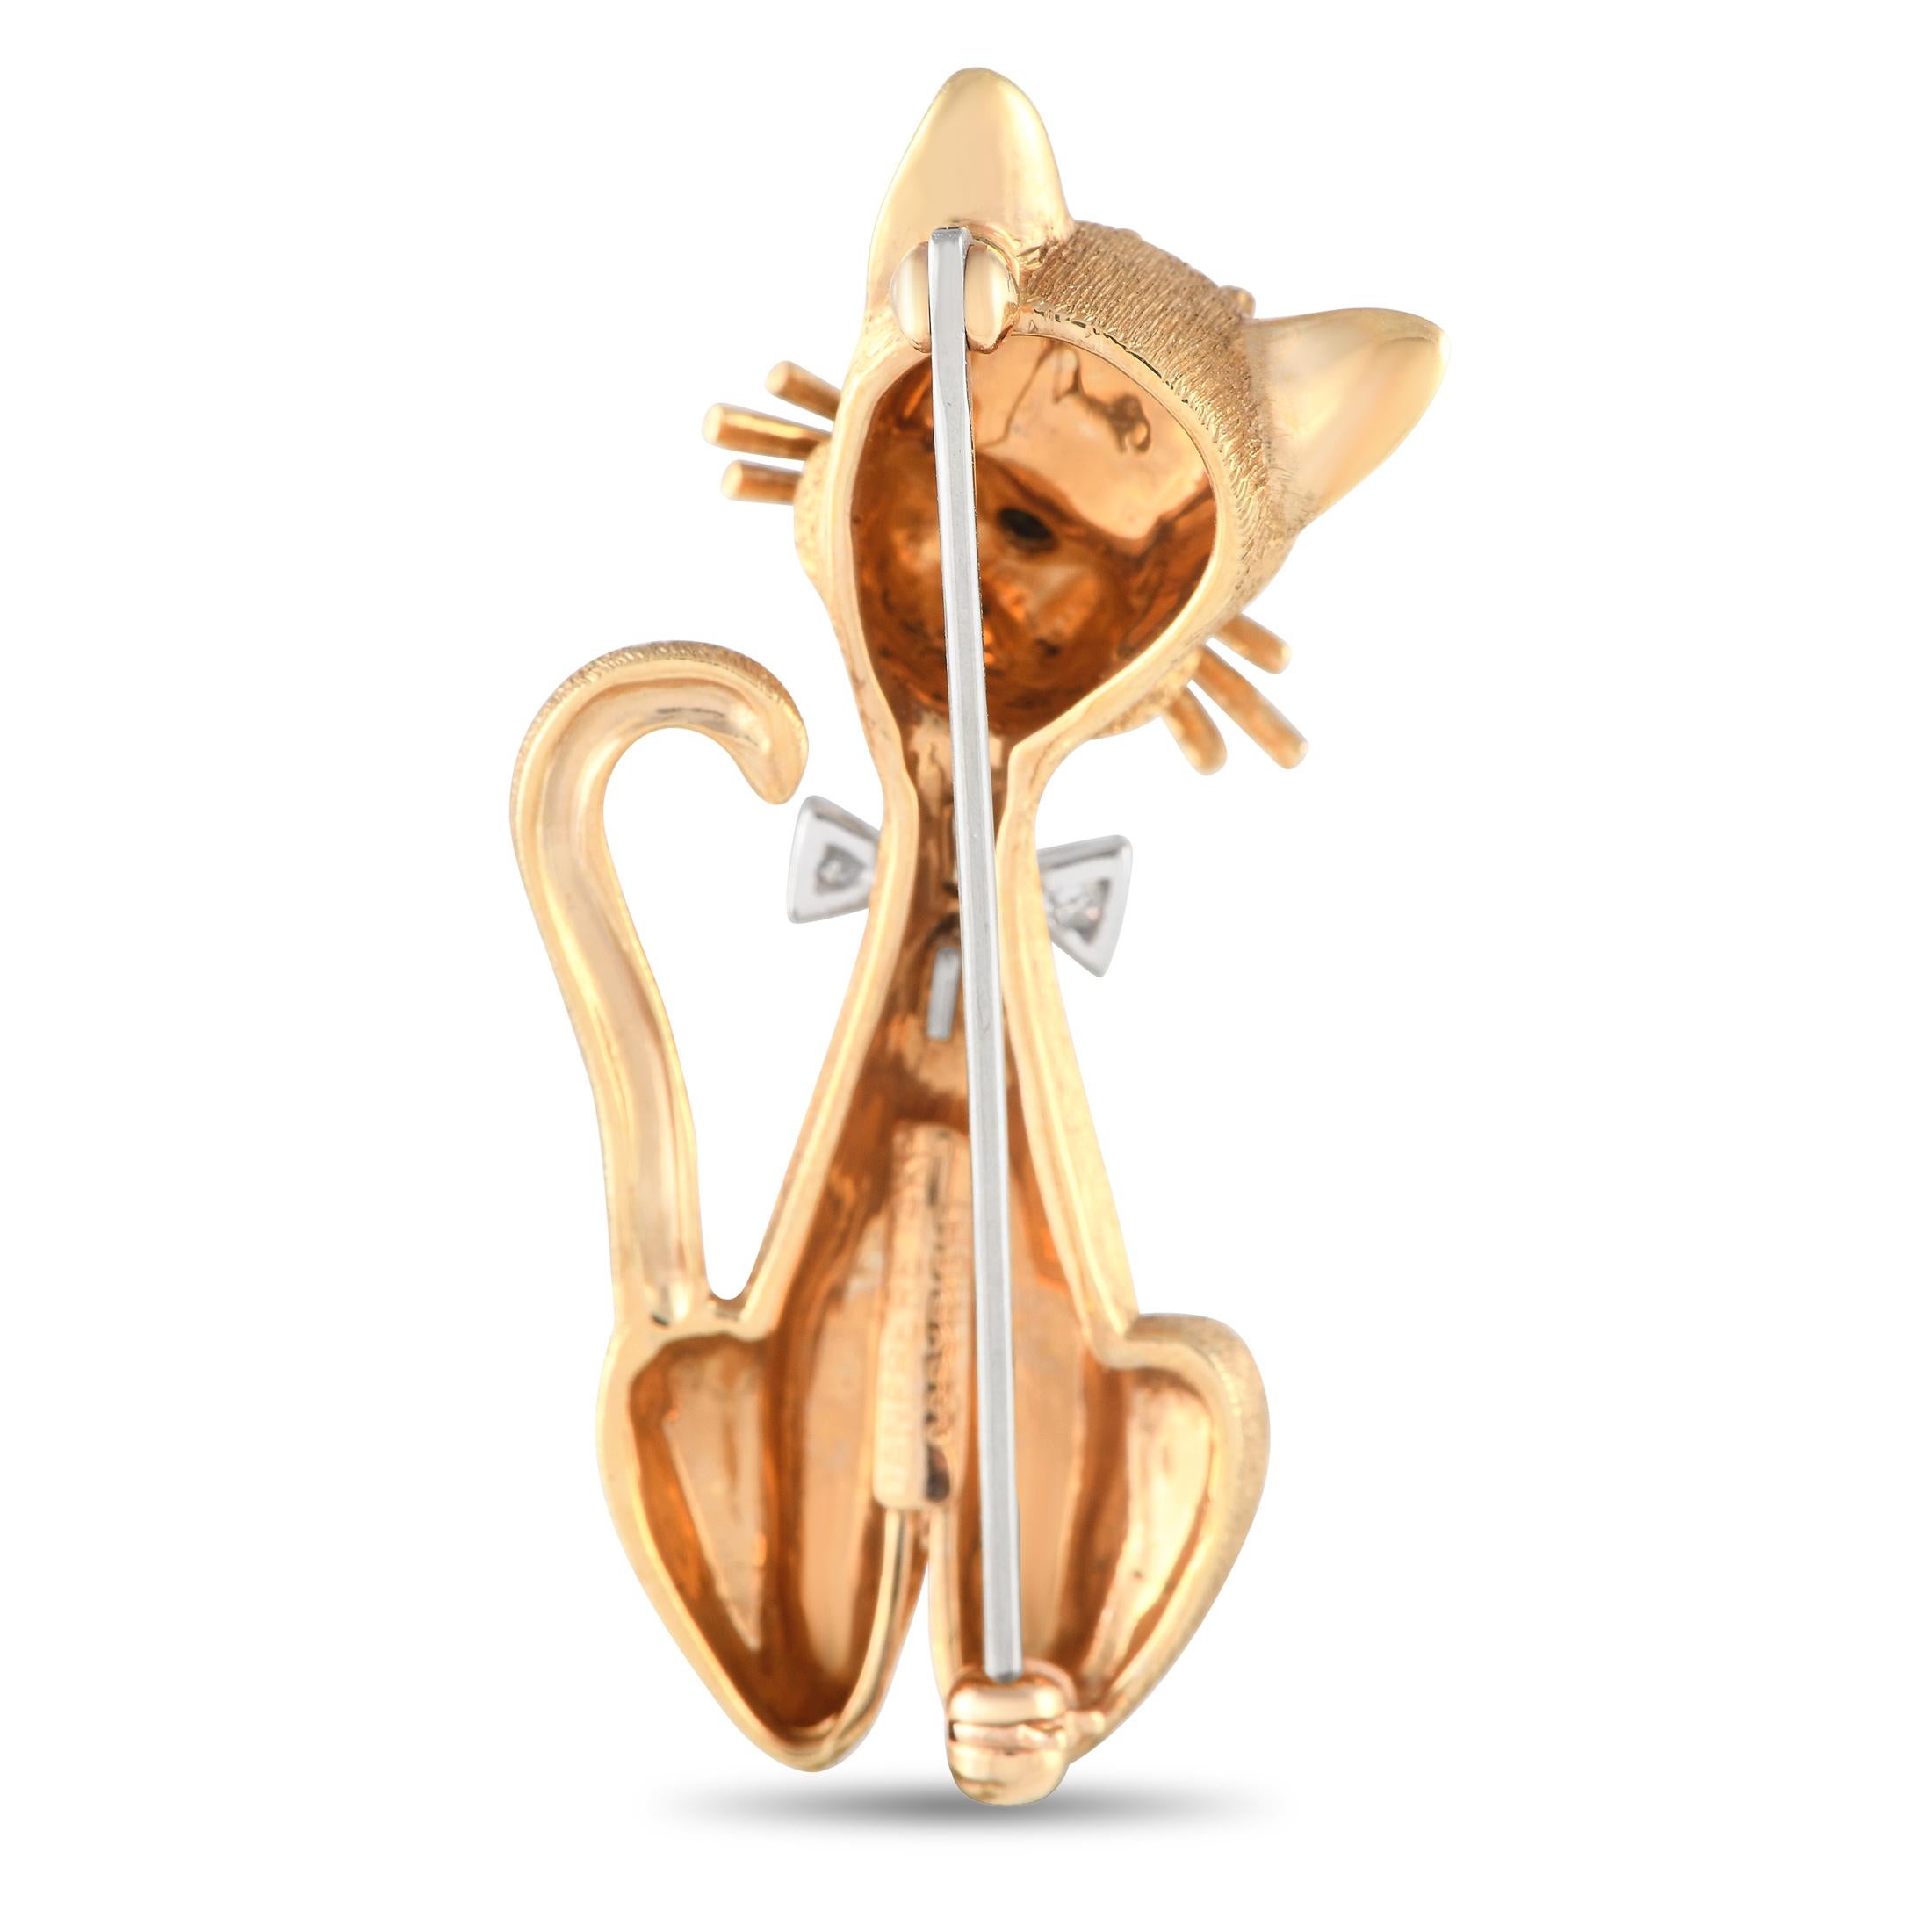 An intricately fashioned brooch to bring a touch of whimsy and a hint of class to an outfit. Designed by Dan Frere, this brooch takes the form of a cat in solid 14K yellow gold detailed with textured and high-polish finishes. The golden cat brooch